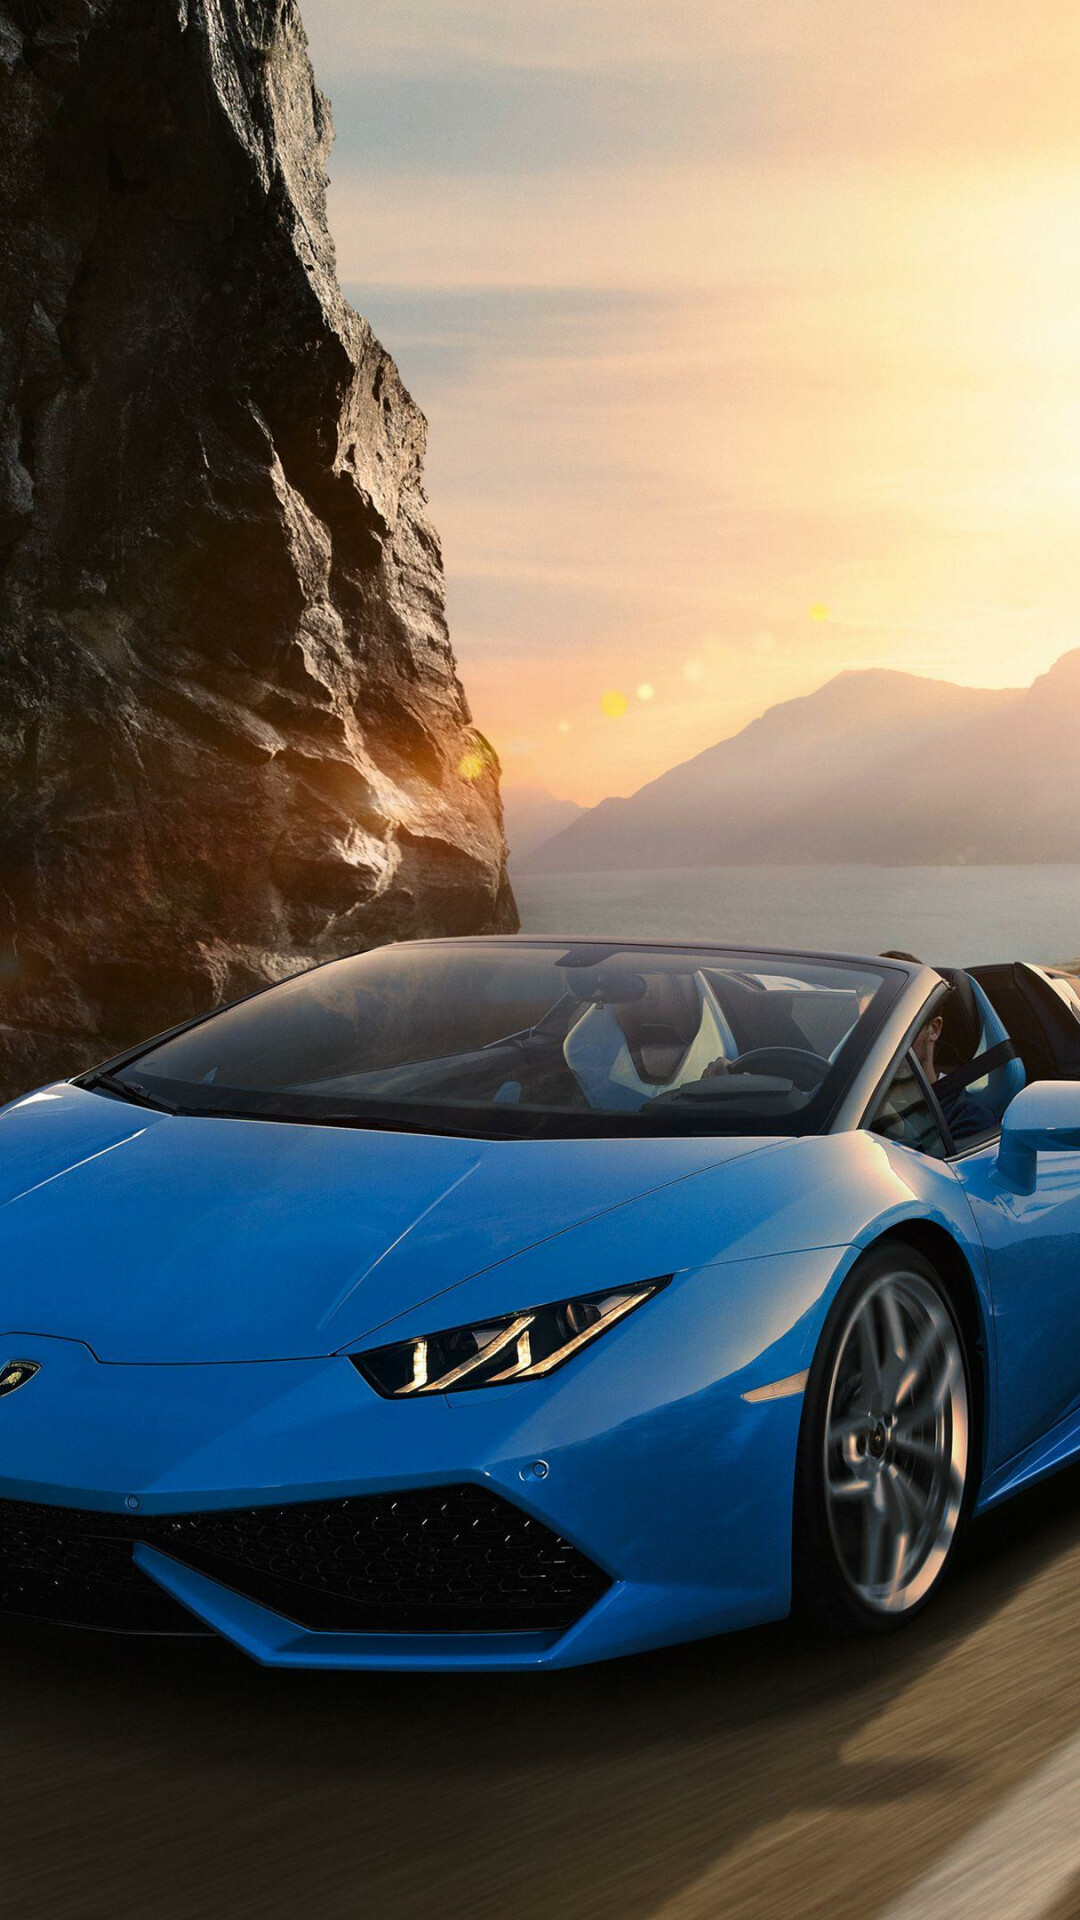 Lamborghini: The Italian automotive brand, was bought by the Chrysler Corporation in 1987. 1080x1920 Full HD Wallpaper.